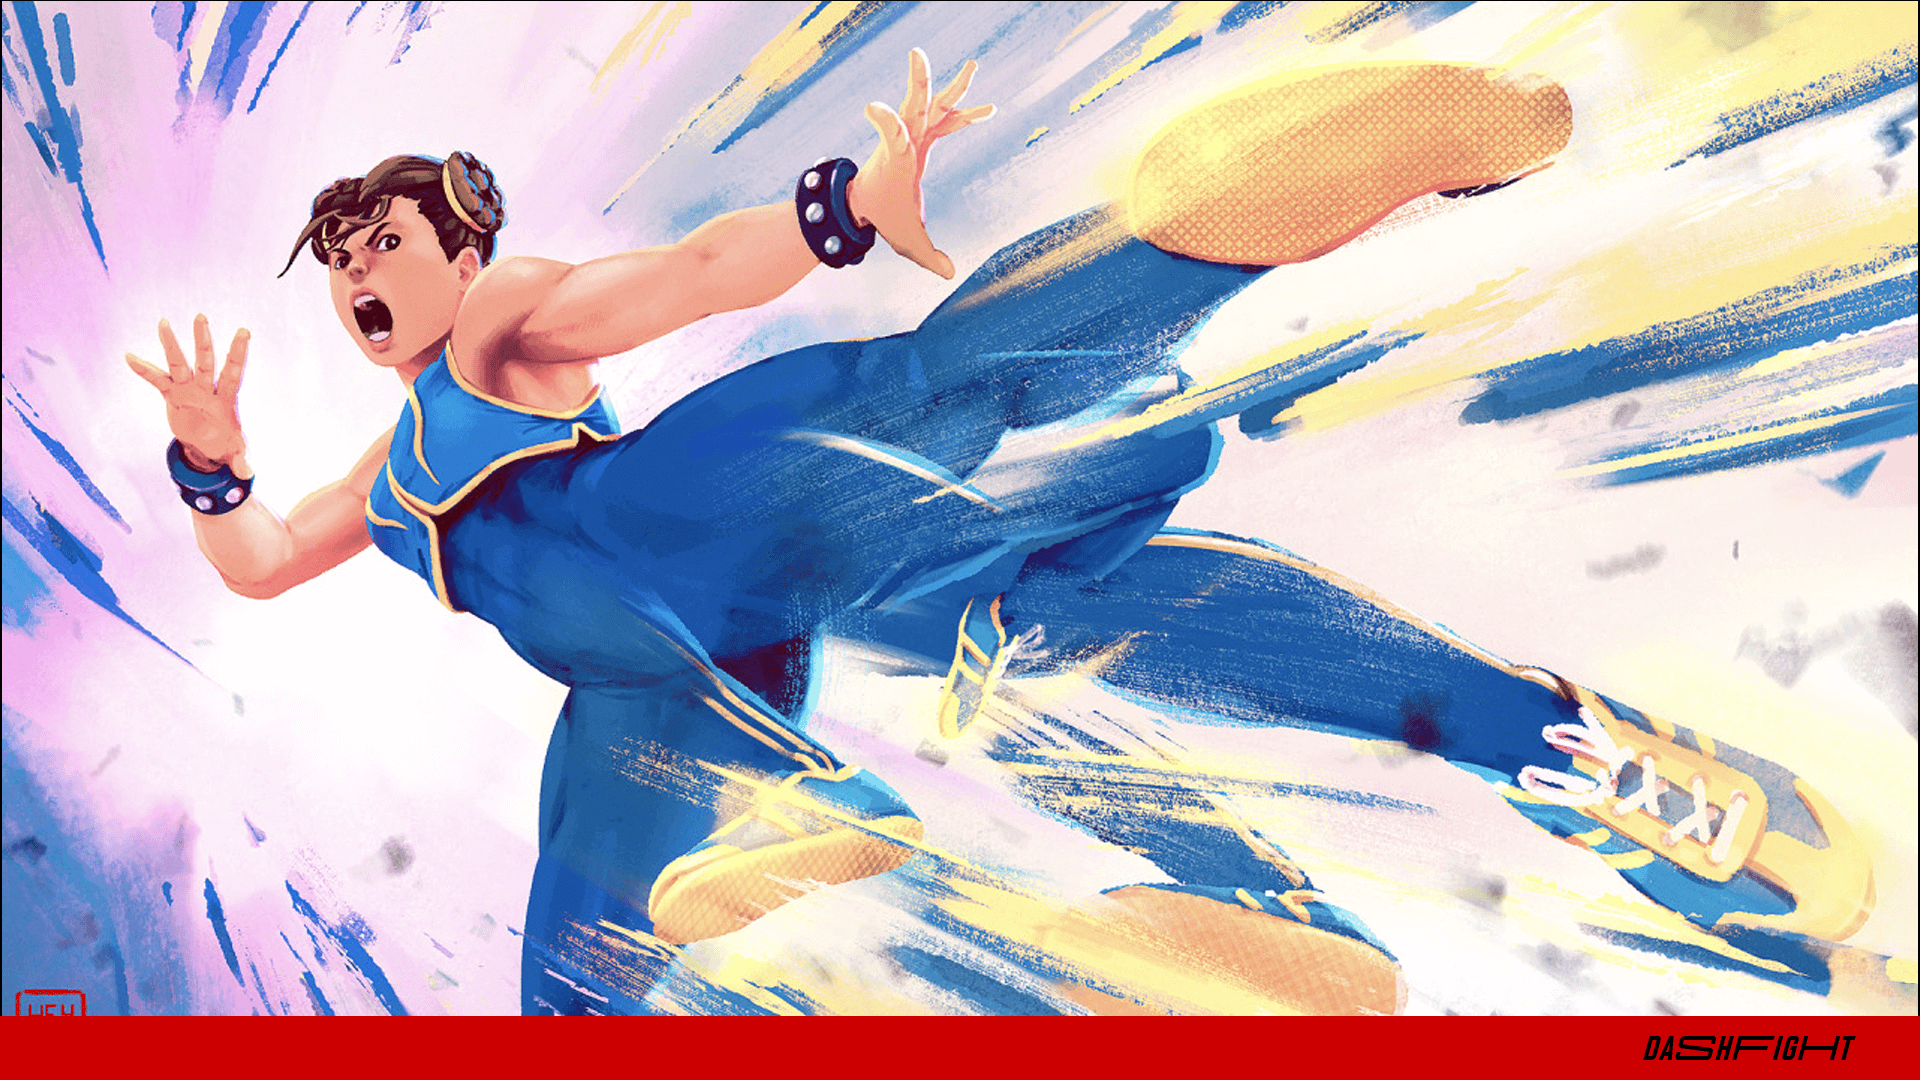 Street Fighter 5: Chun Li Guide - Combos and Move List